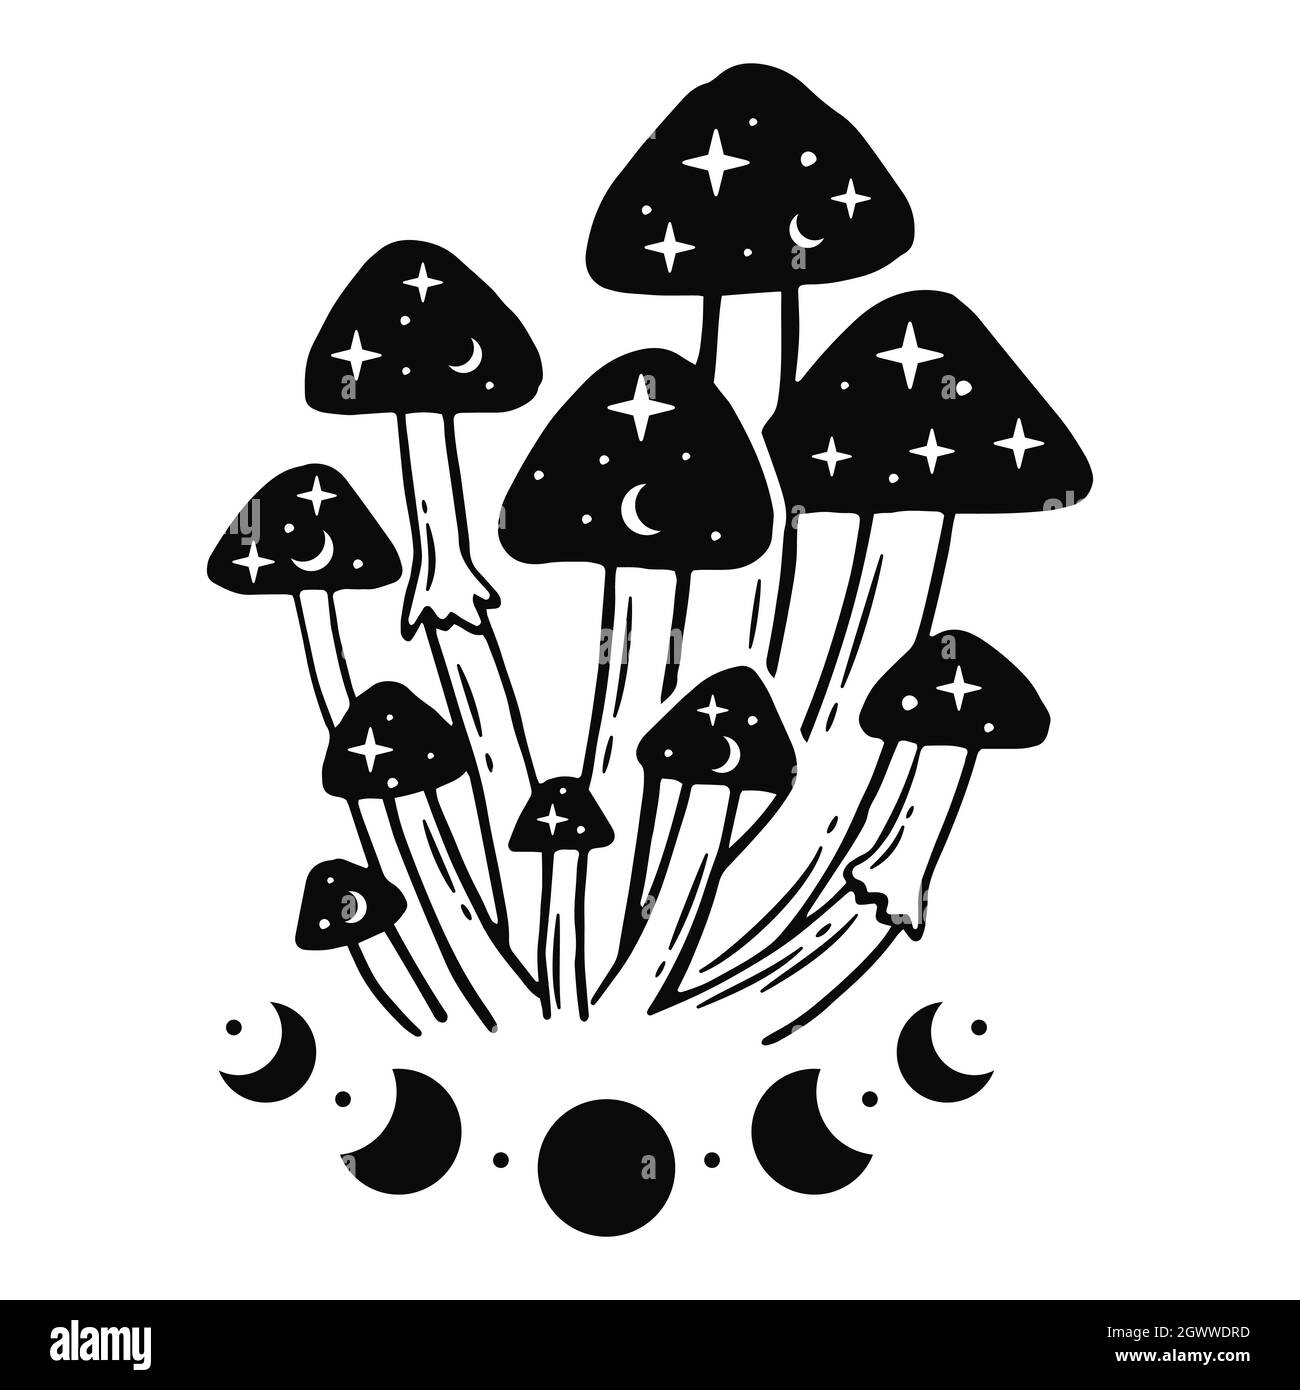 Black and white illustrations with magic mushrooms and moon phases. Stock Vector